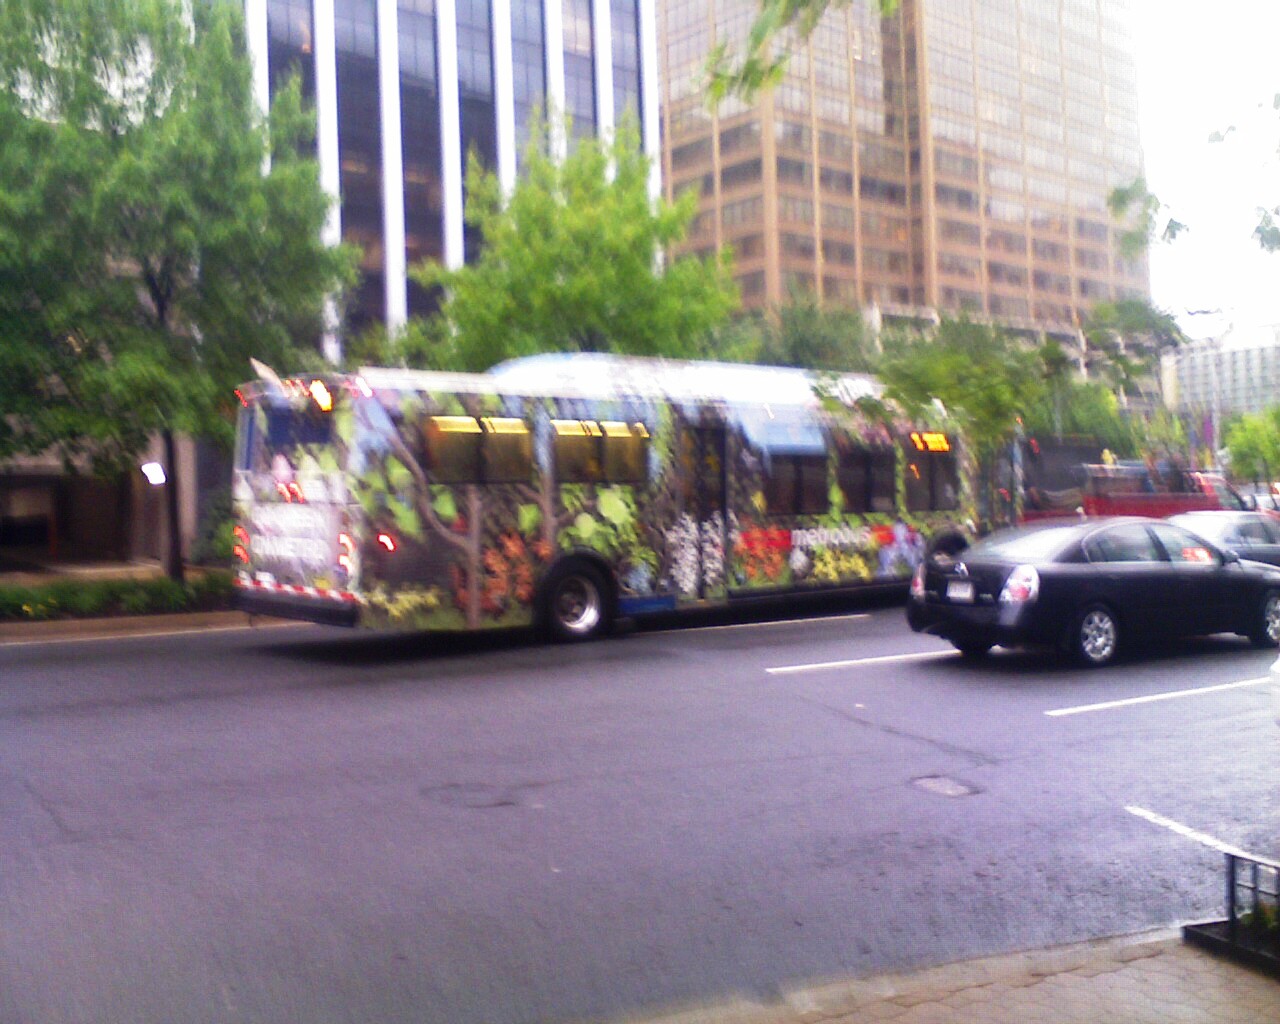 Even the bus I rode was green (At least today)